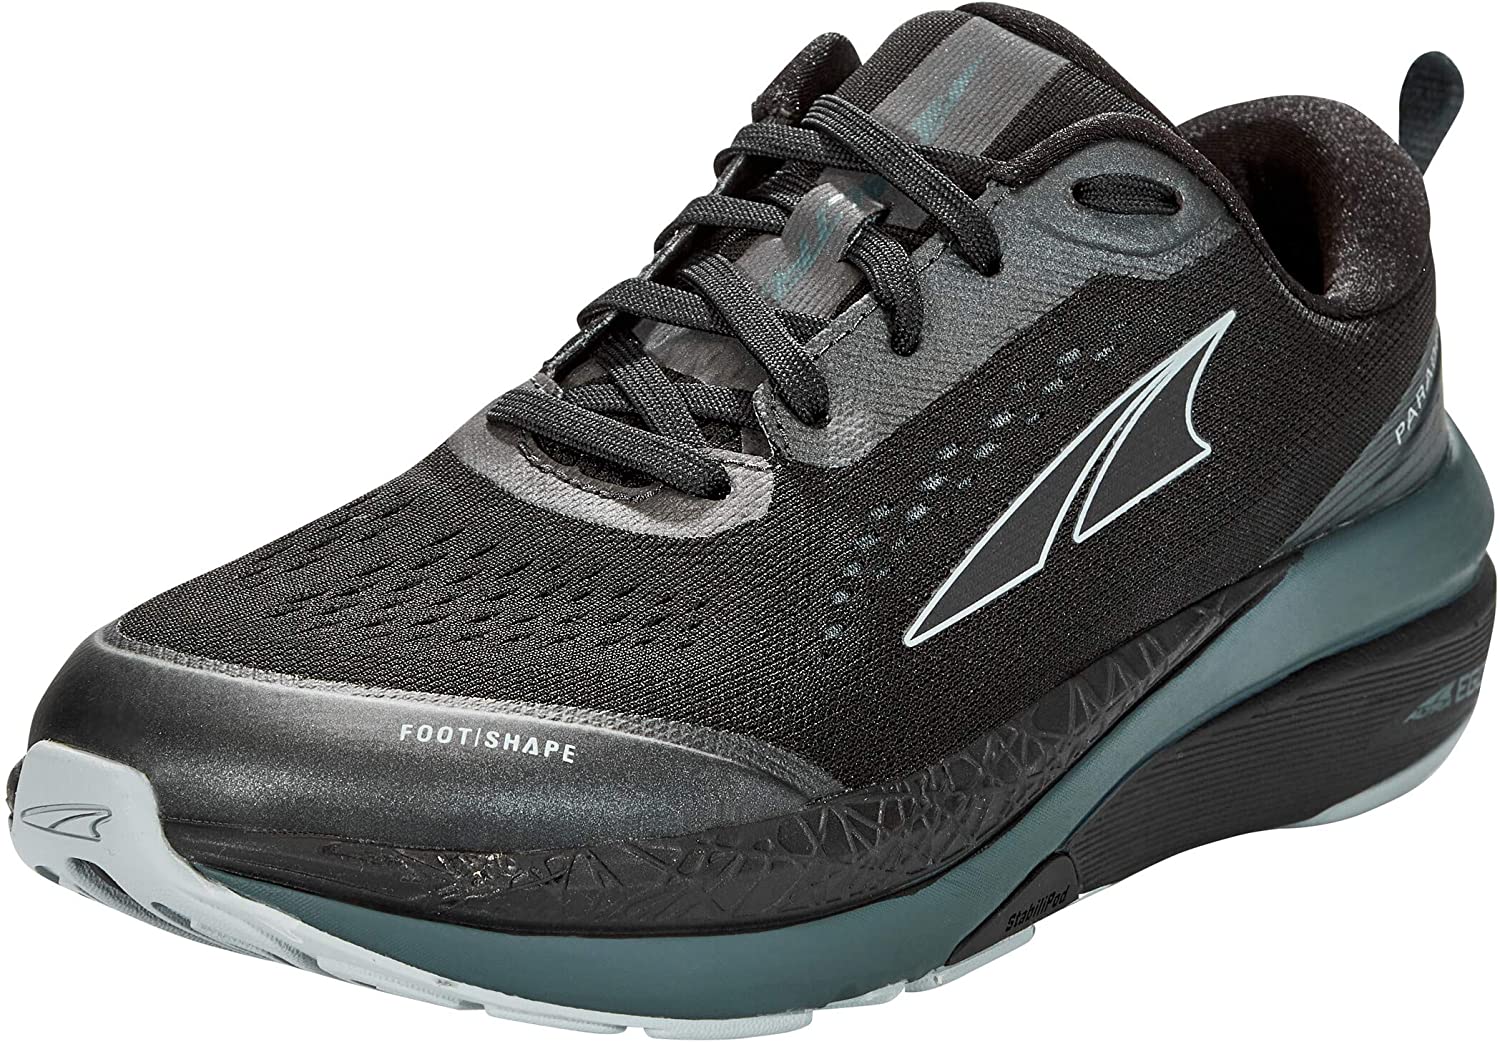 Altra Women's Paradigm 5 Road Running Shoe in Black from the side